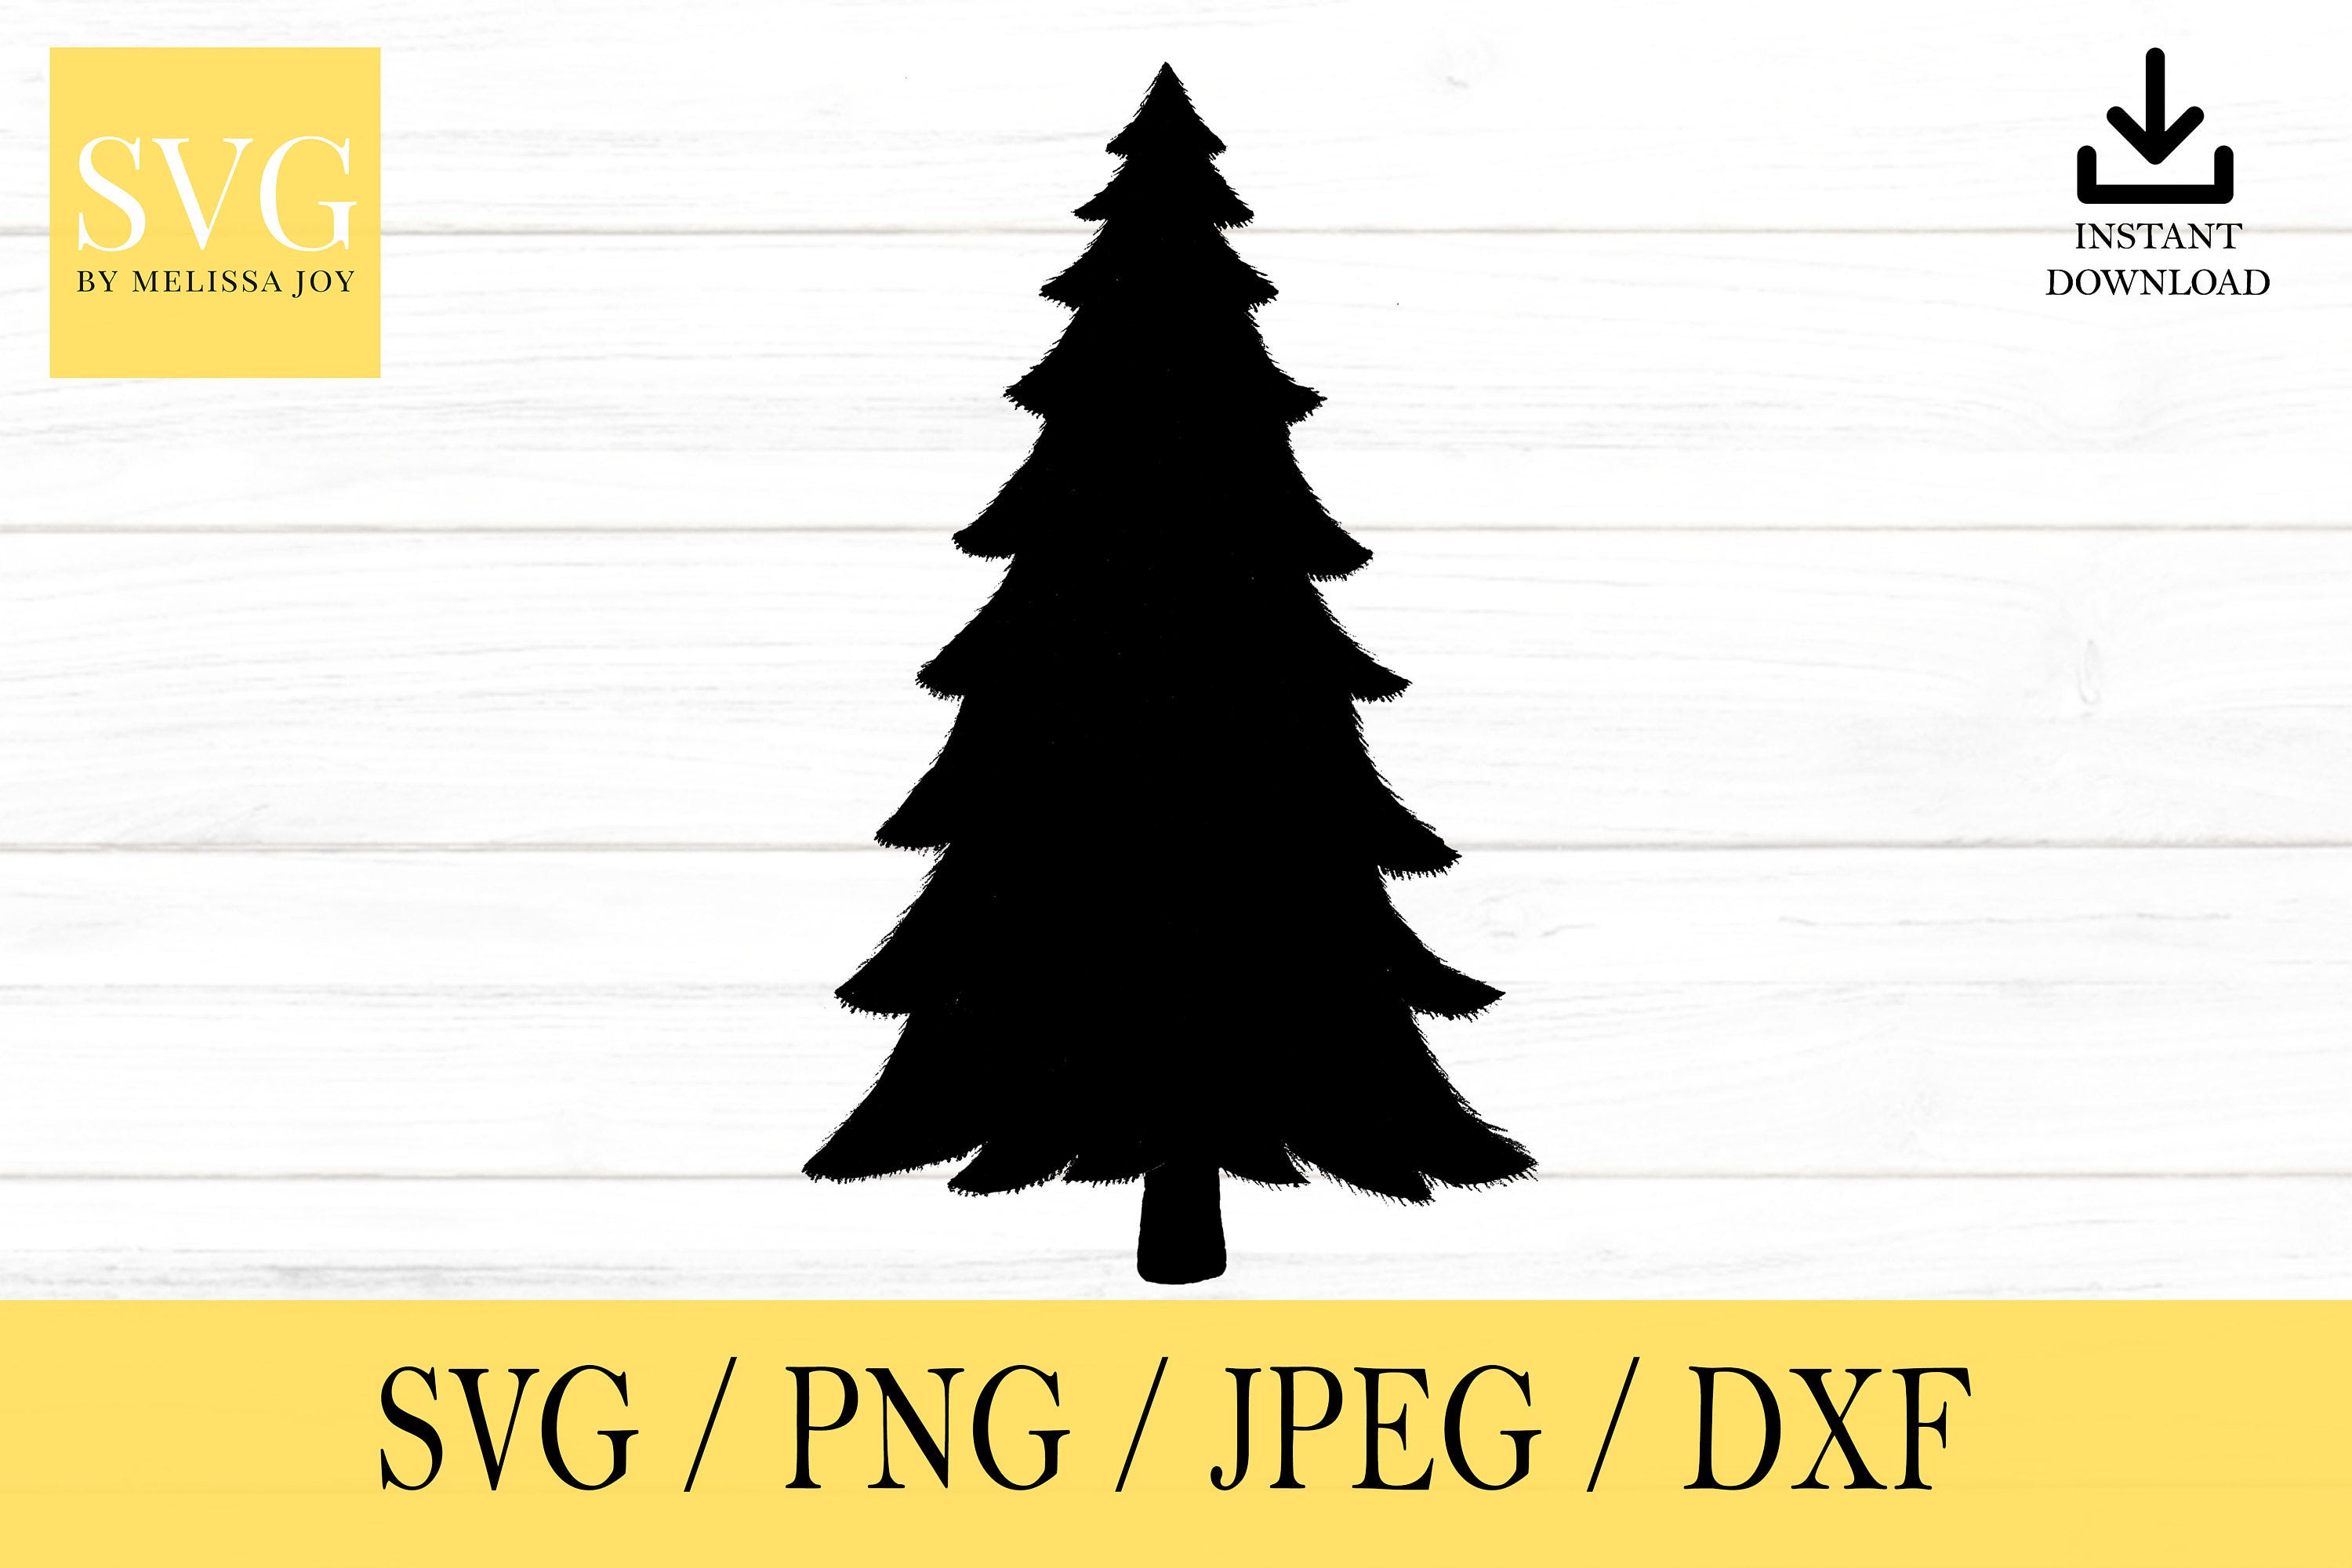 Christmas Tree svg, Holiday SVG, svg, png, dxf, jpeg, Digital Download, Cut File, Cricut, Silhouette, Glowforge, Svg files for cricut